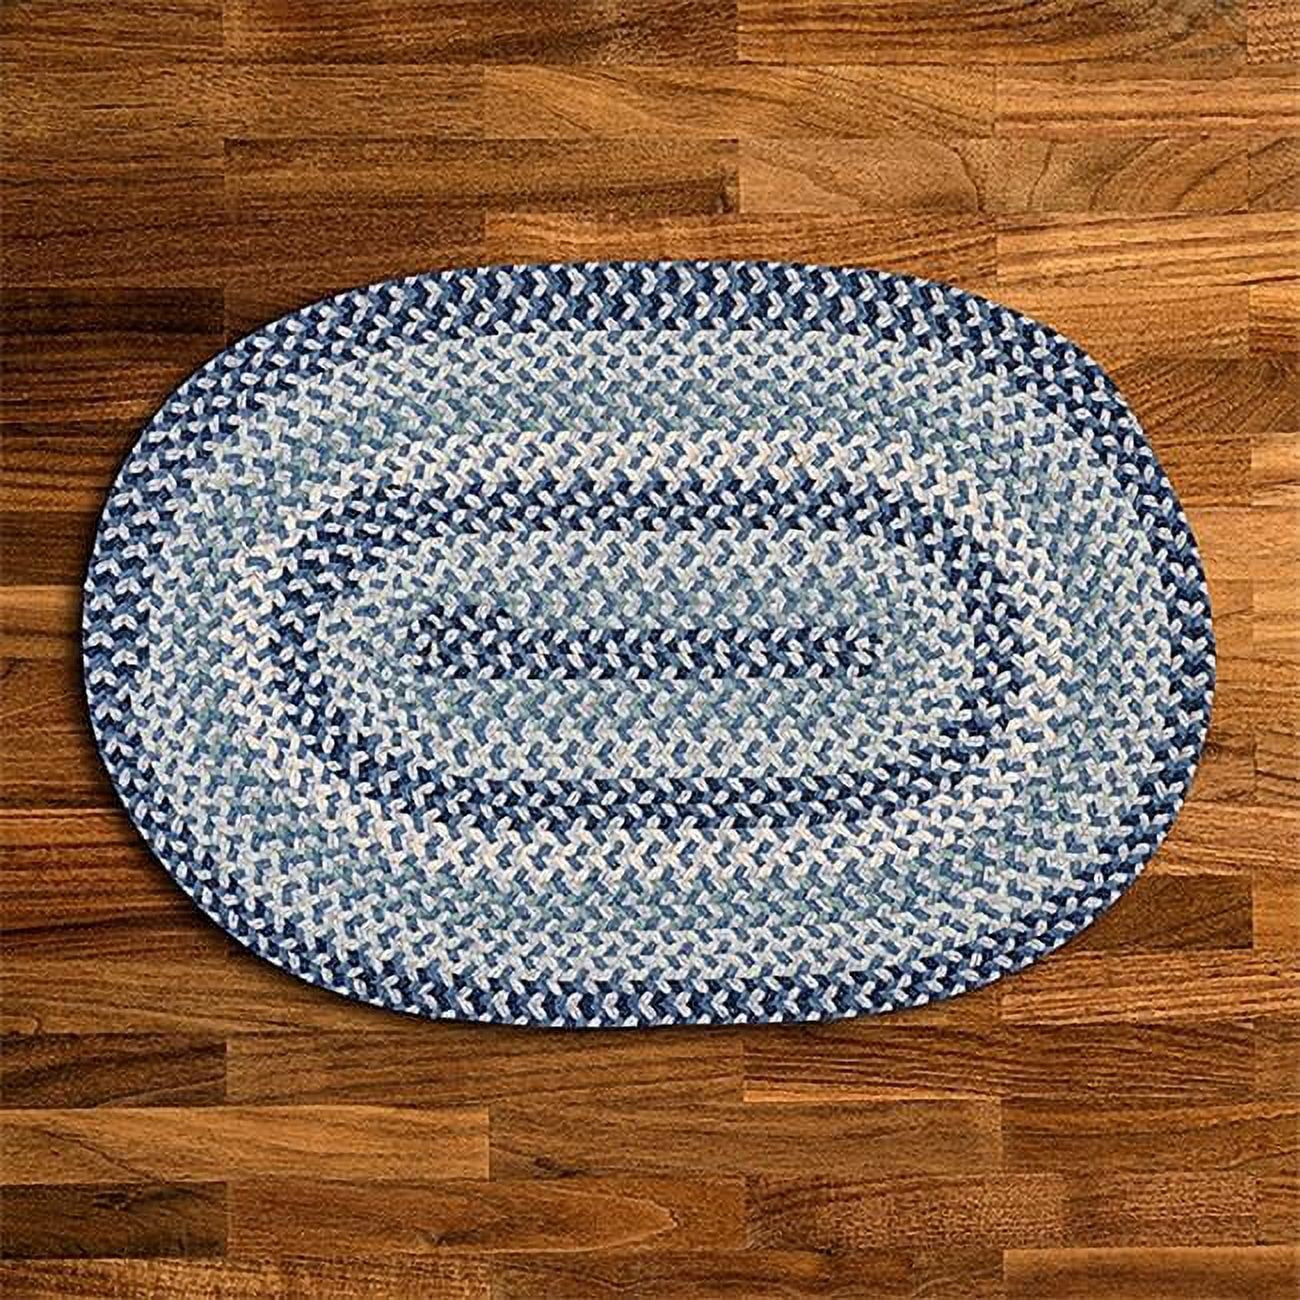 Bc53r096x120 8 X 10 Ft. Boston Common Oval Rug, Capeside Blue